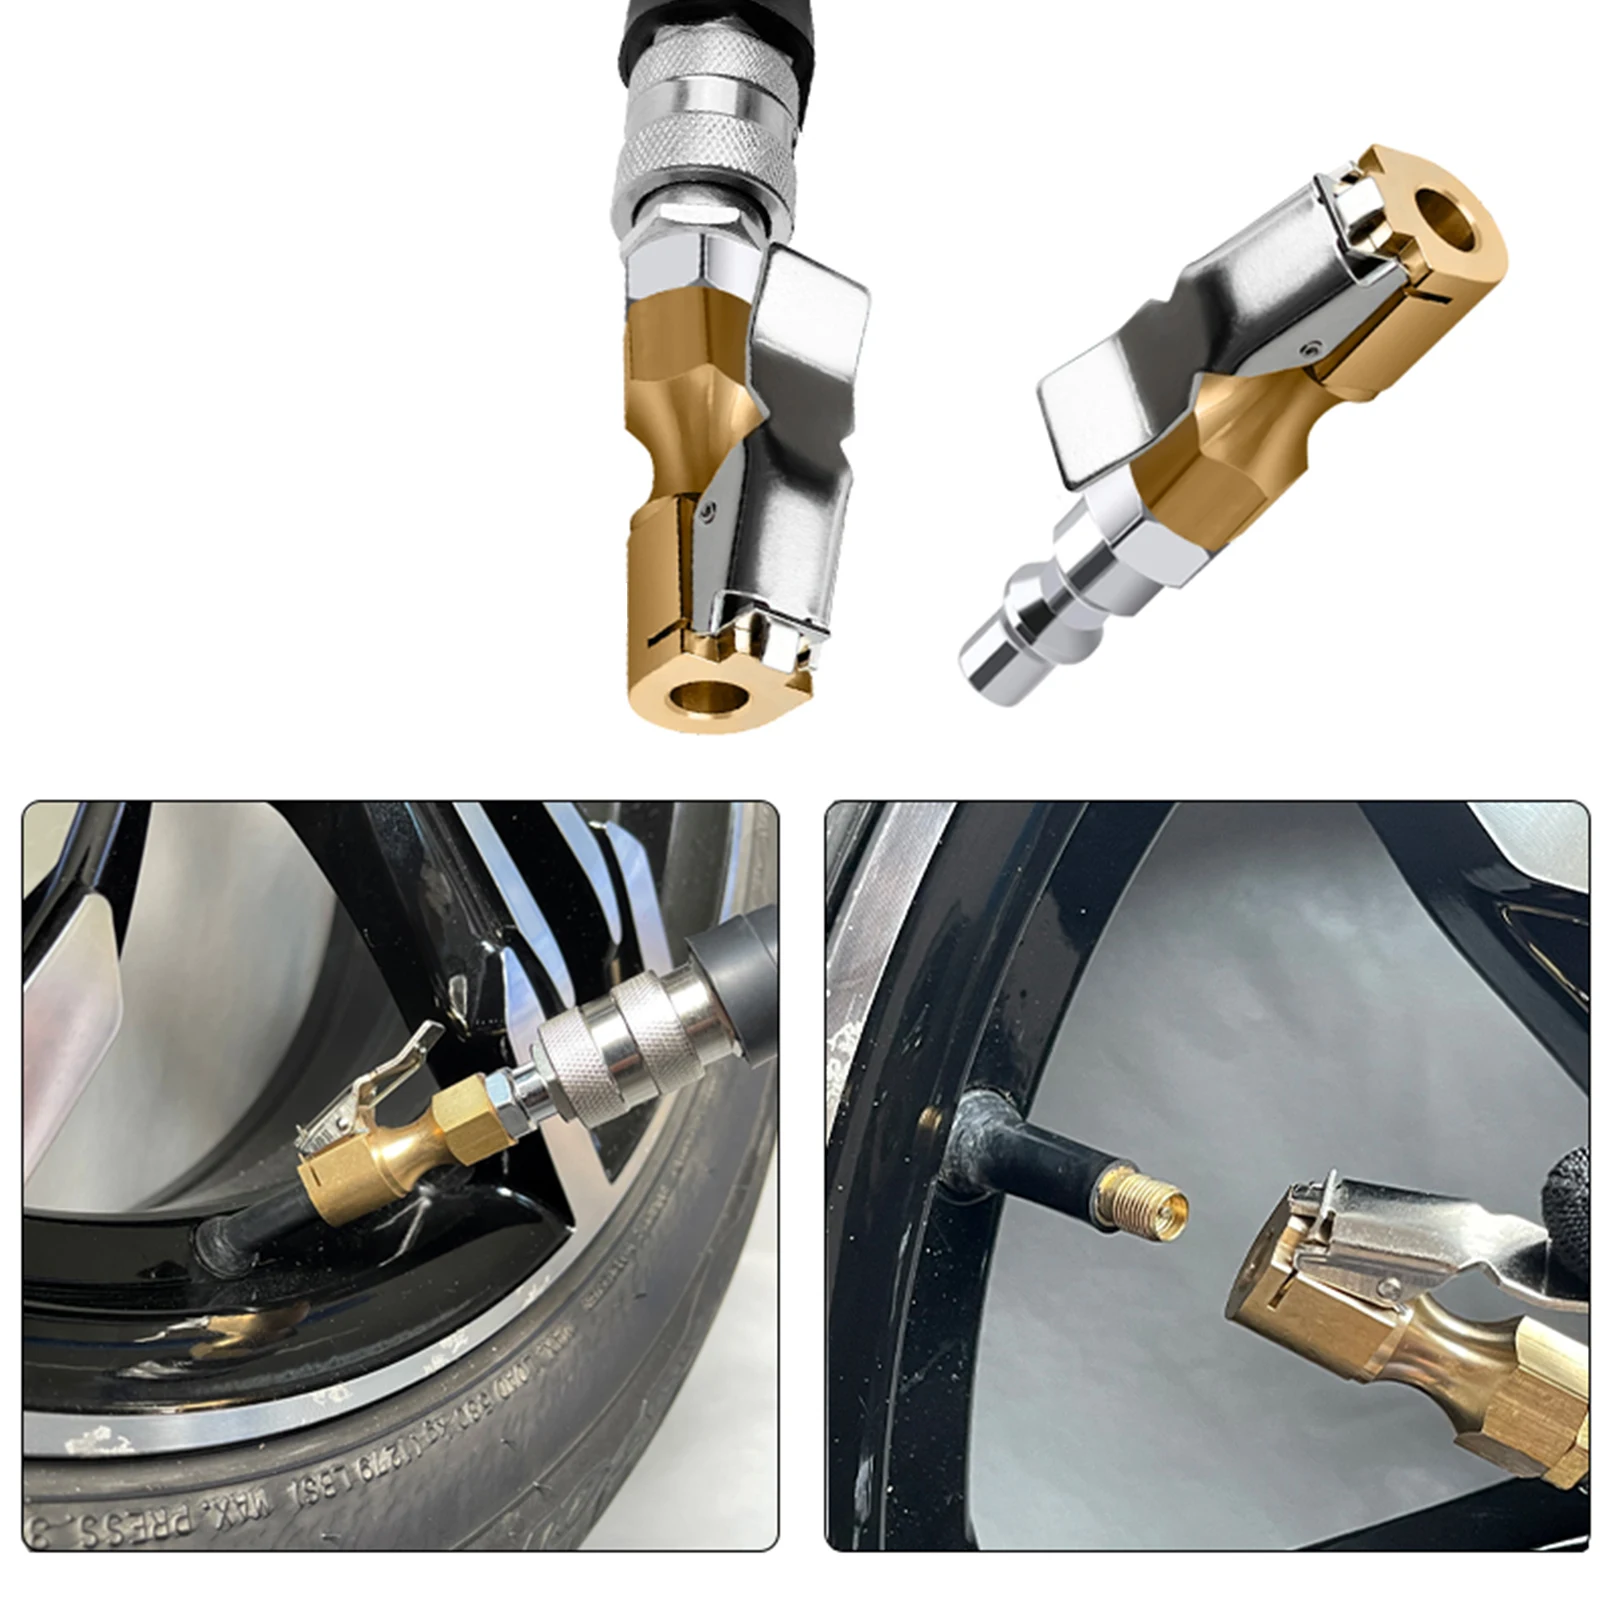 

3pcs/set NPT Brass Air Chuck Closed Flow Heavy Duty Lock on Quick Connect Clip Intake Nozzle for Car Tyre Tire Inflator Pump